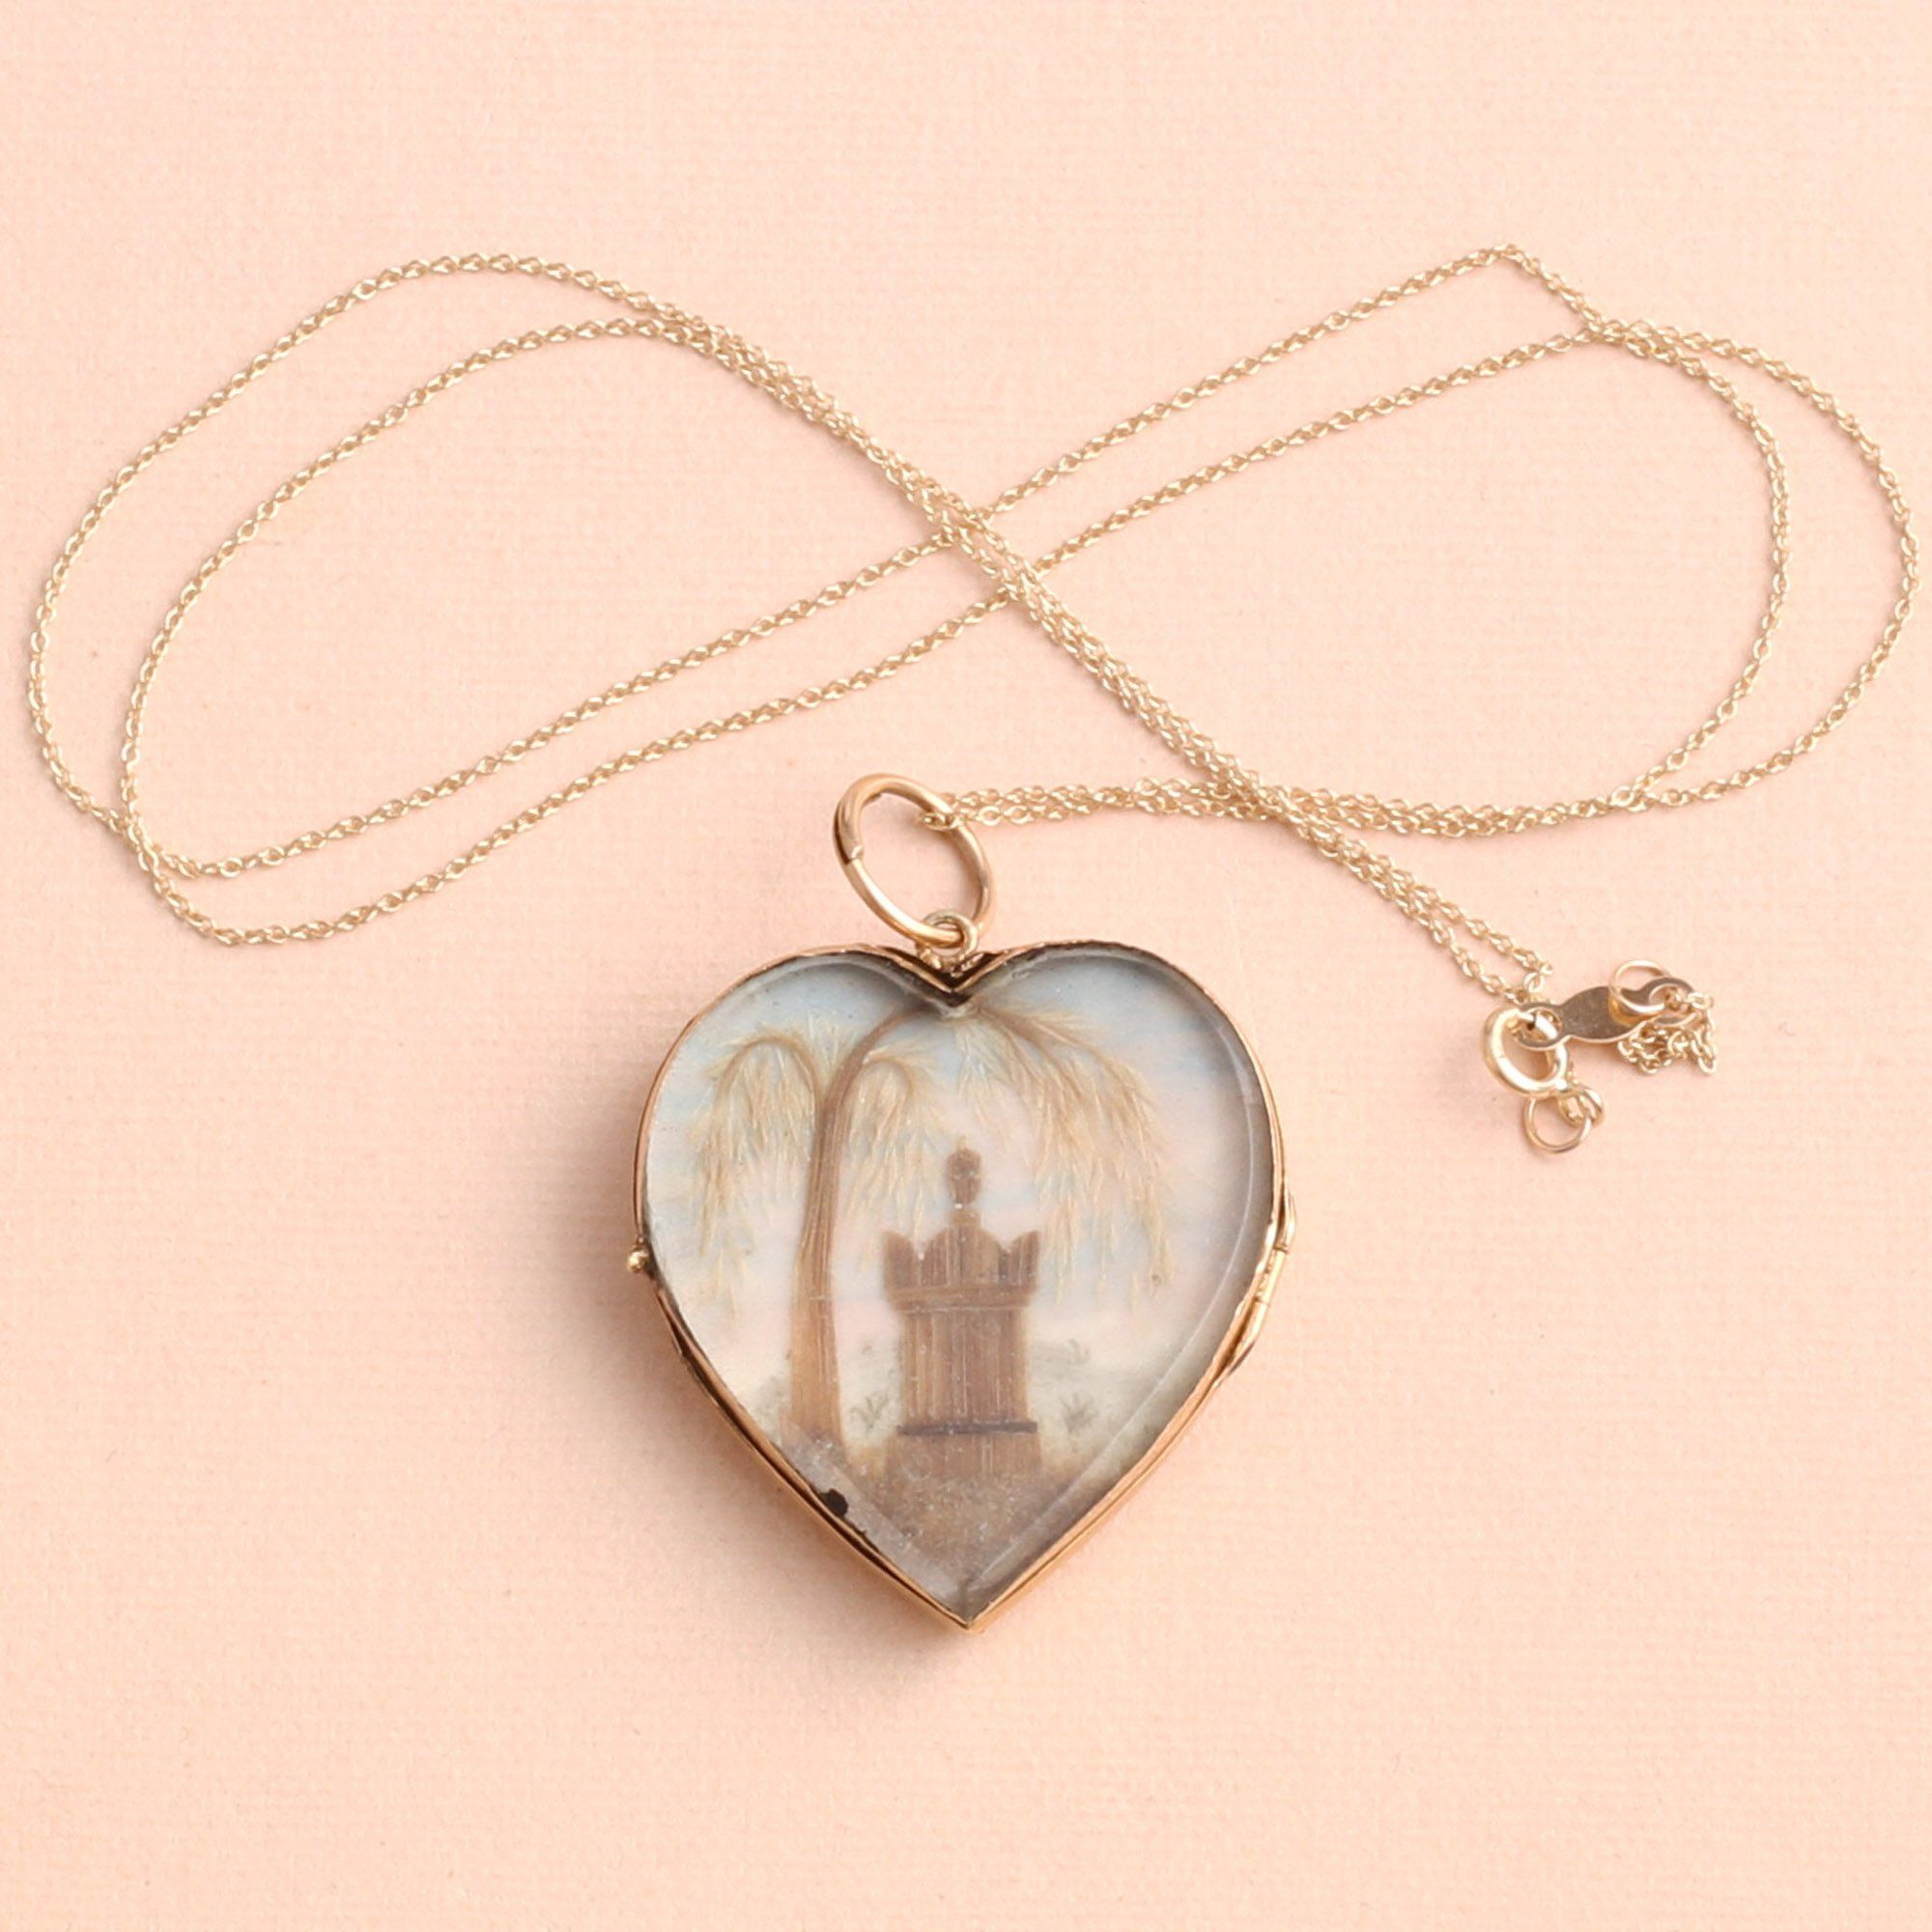 Back detail of Early Victorian Heart-Shaped Mourning Locket